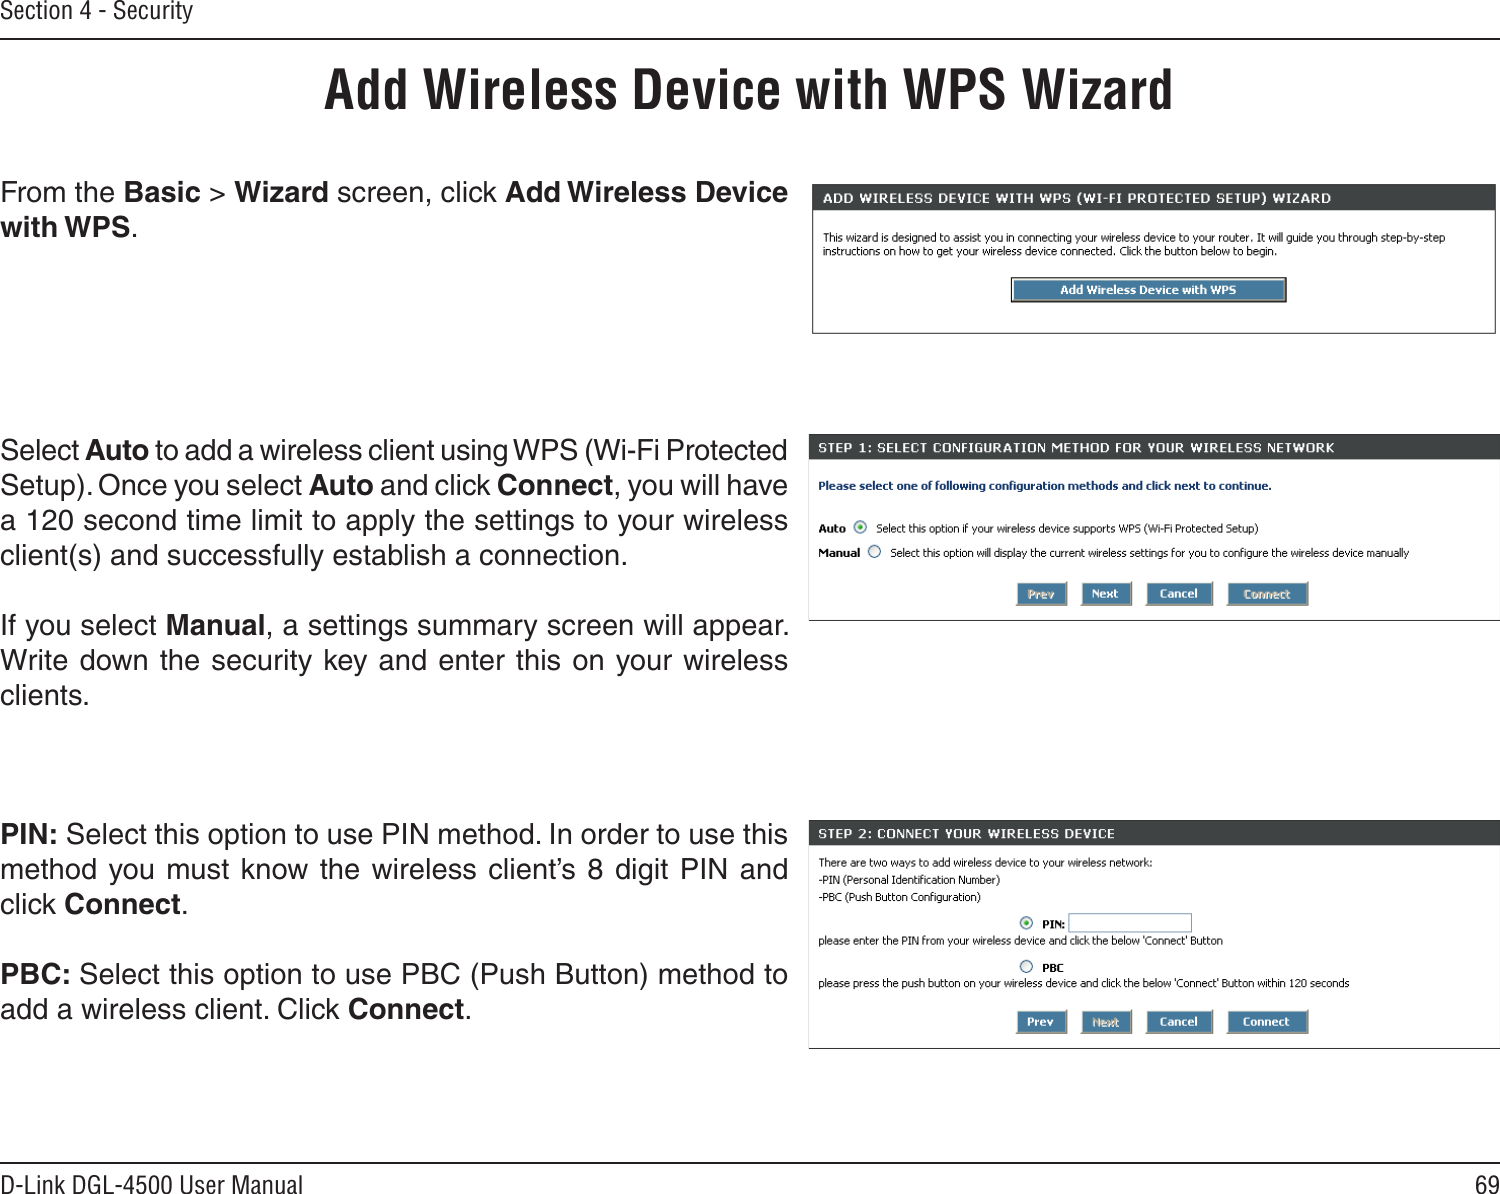 69D-Link DGL-4500 User ManualSection 4 - SecurityFrom the Basic &gt; Wizard screen, click Add Wireless Device with WPS.Add Wireless Device with WPS WizardPIN: Select this option to use PIN method. In order to use this method you must know the  wireless client’s 8  digit PIN and click Connect.PBC: Select this option to use PBC (Push Button) method to add a wireless client. Click Connect.Select Auto to add a wireless client using WPS (Wi-Fi Protected Setup). Once you select Auto and click Connect, you will have a 120 second time limit to apply the settings to your wireless client(s) and successfully establish a connection. If you select Manual, a settings summary screen will appear. Write down the security key and enter this on your wireless clients. 